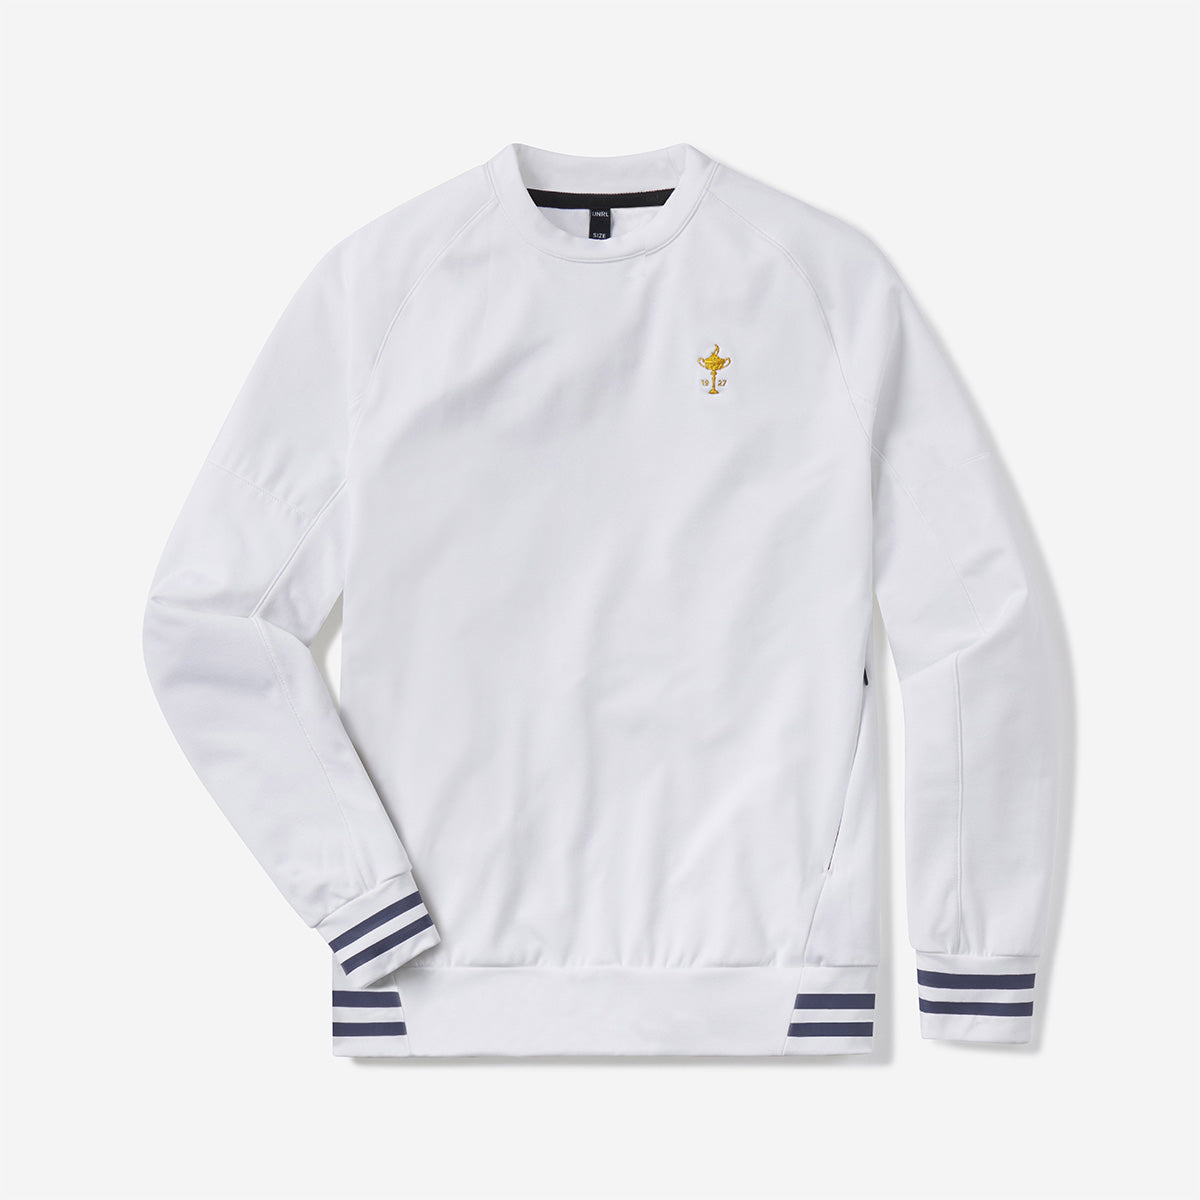 UNRL x Barstool Ryder Cup Trophy Crossover Crewneck-Crewnecks-Fore Play-White-S-Barstool Sports